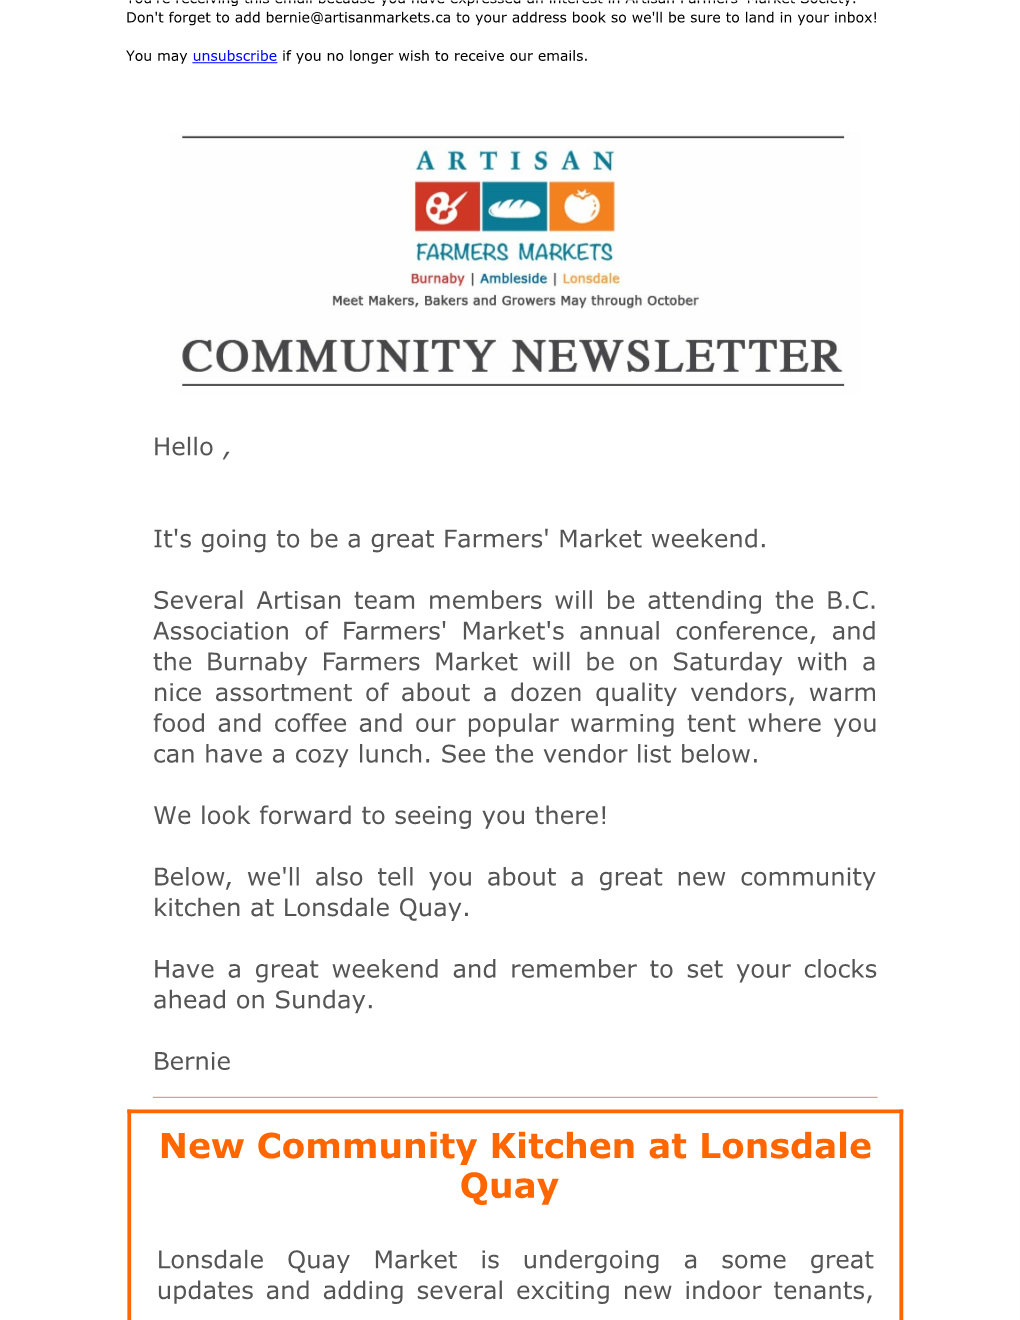 New Community Kitchen at Lonsdale Quay